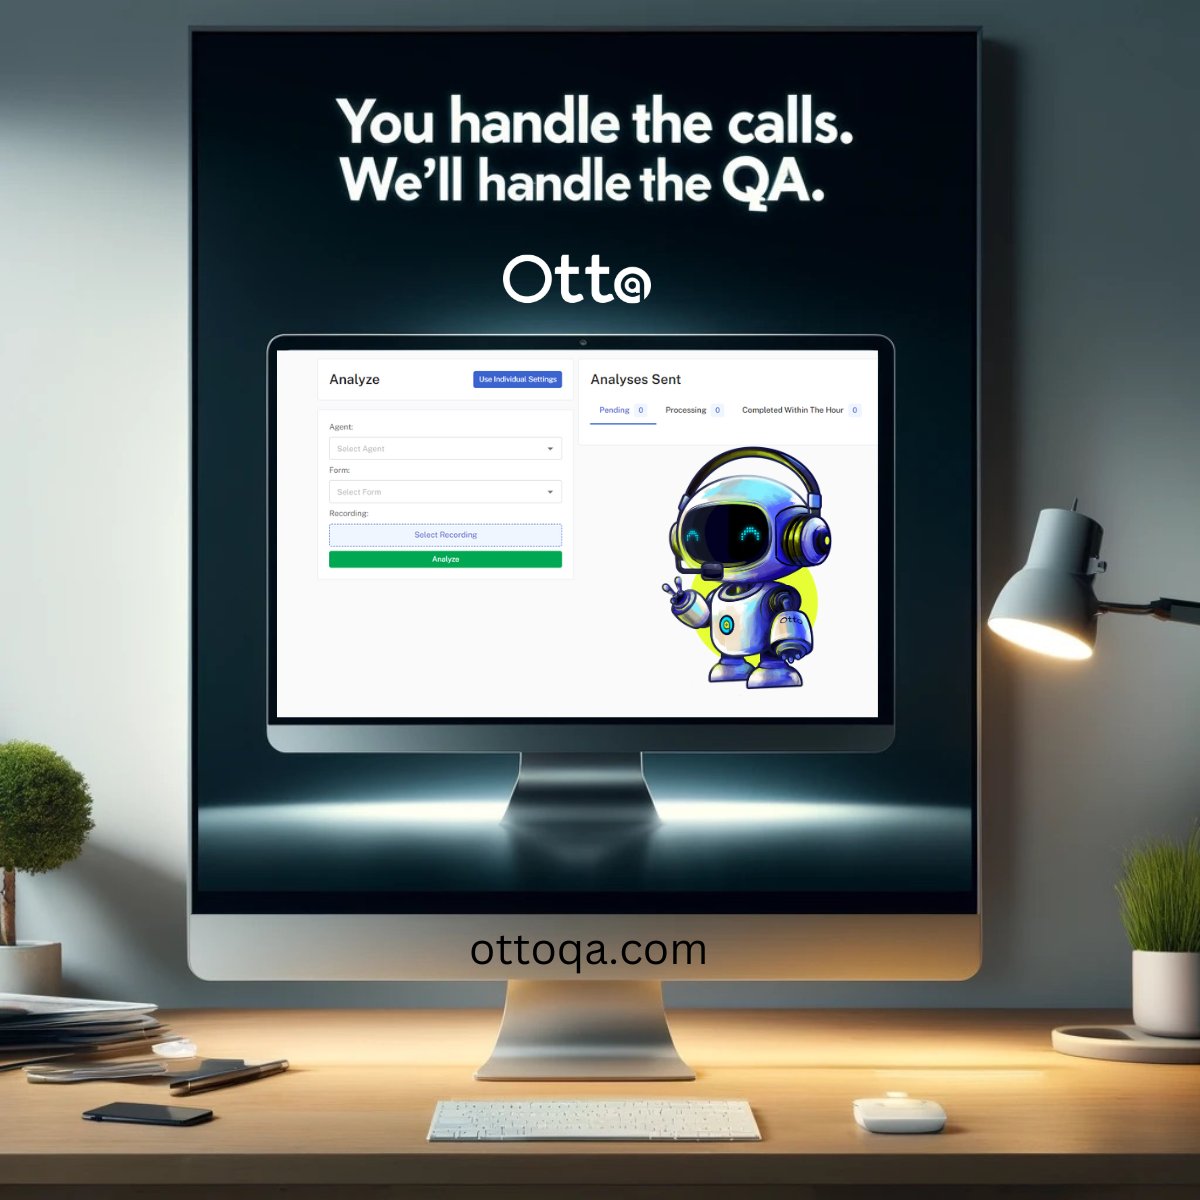 All we do is score contact center QA Calls. Thats it. (Oh ya, With AI) #callcenter #contactcenter #callcentergeek #autoqa #cx #ai